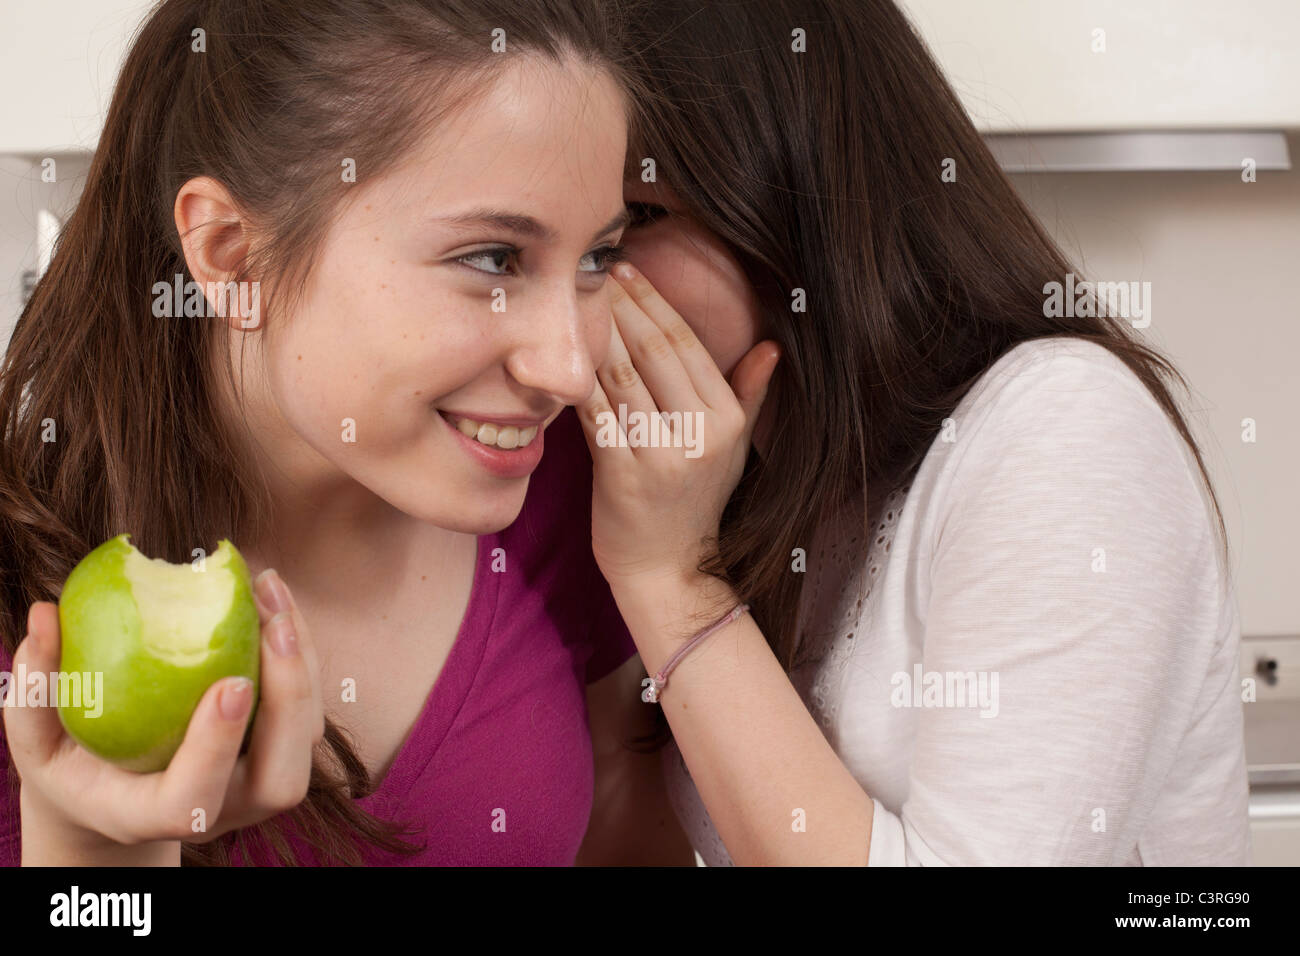 teenage girls eating an apple and sharing a secret Stock Photo